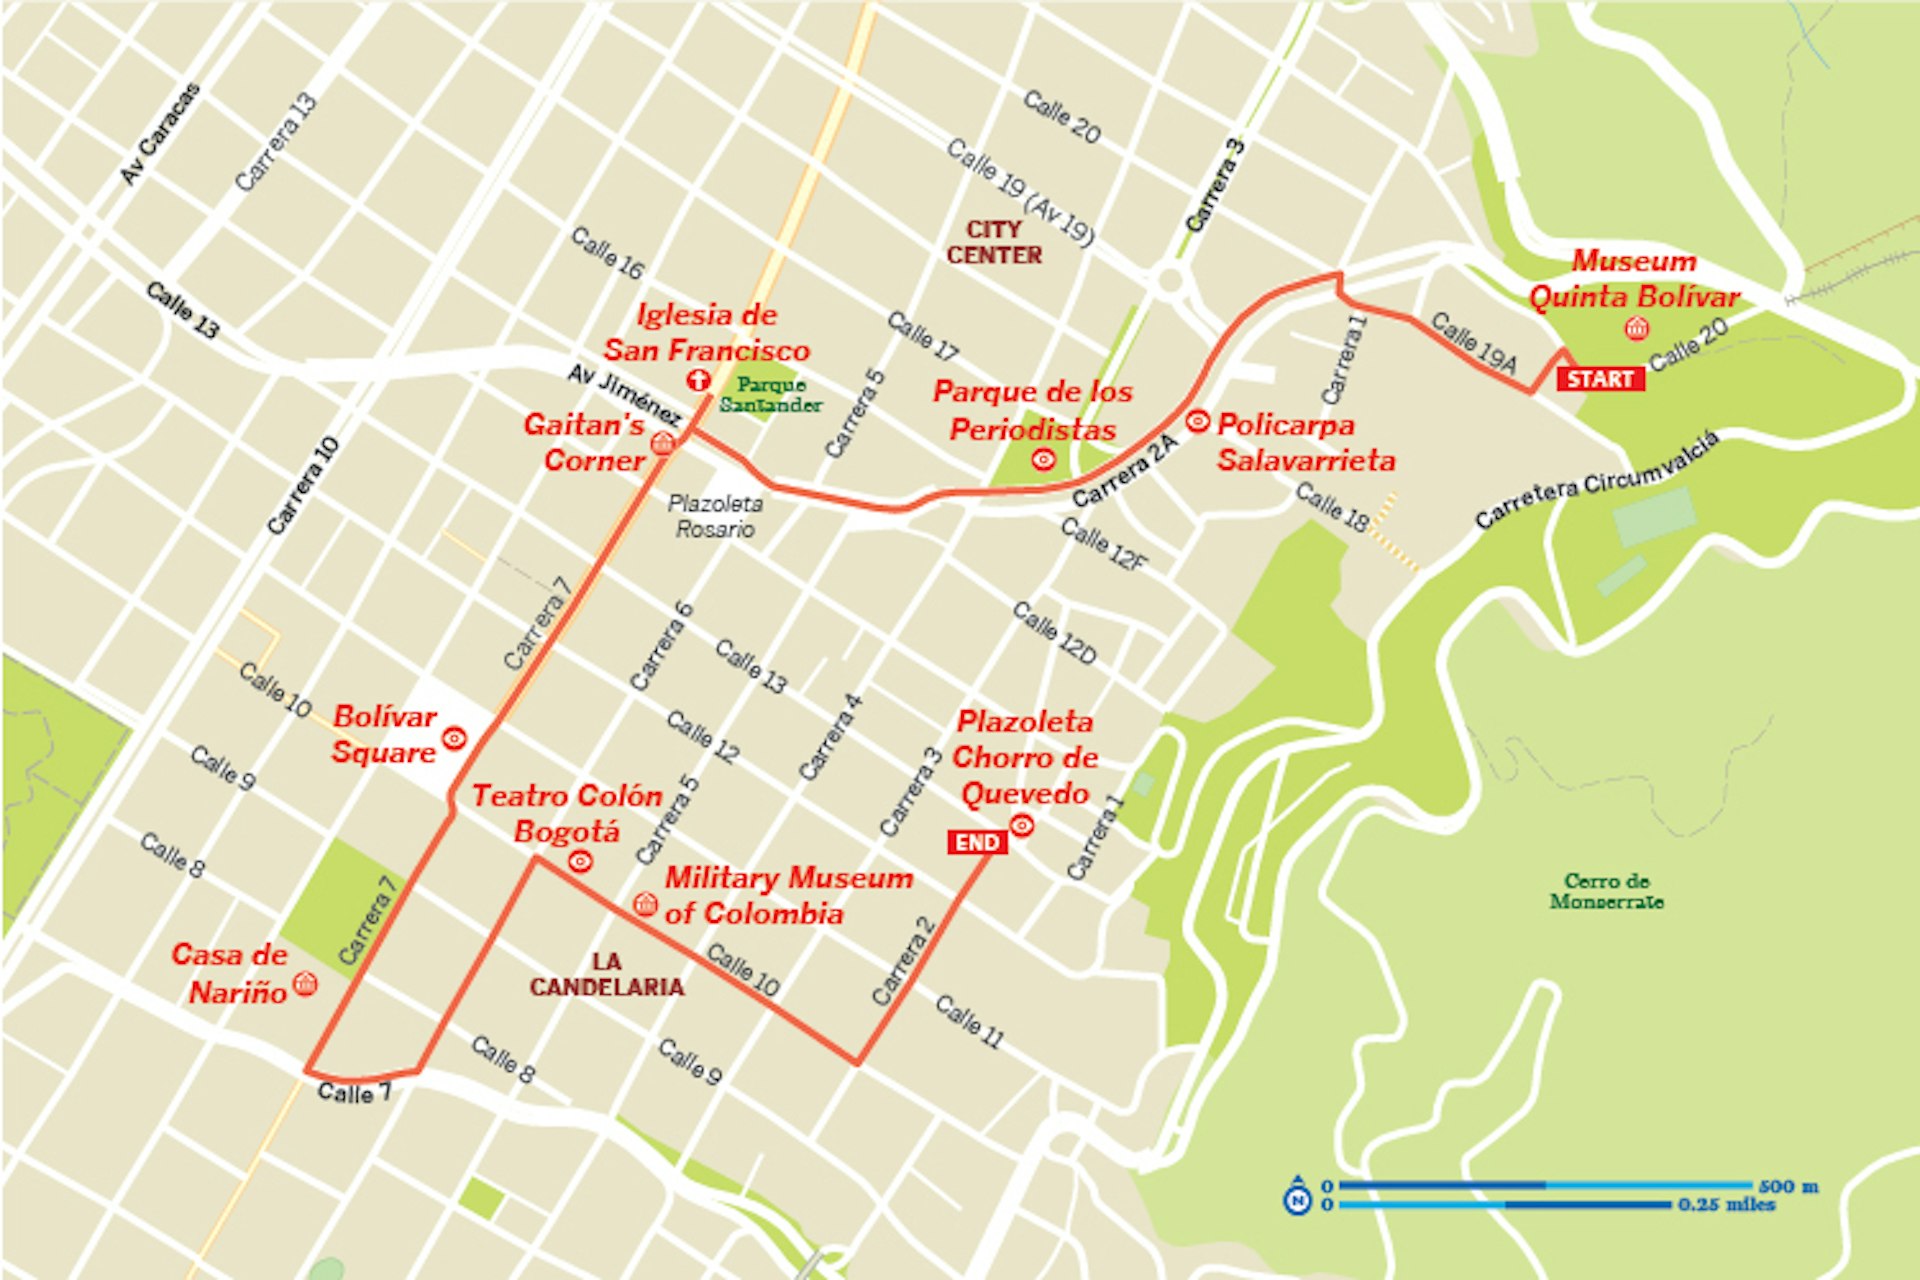 A map of a walking tour in downtown Bogotá, Colombia